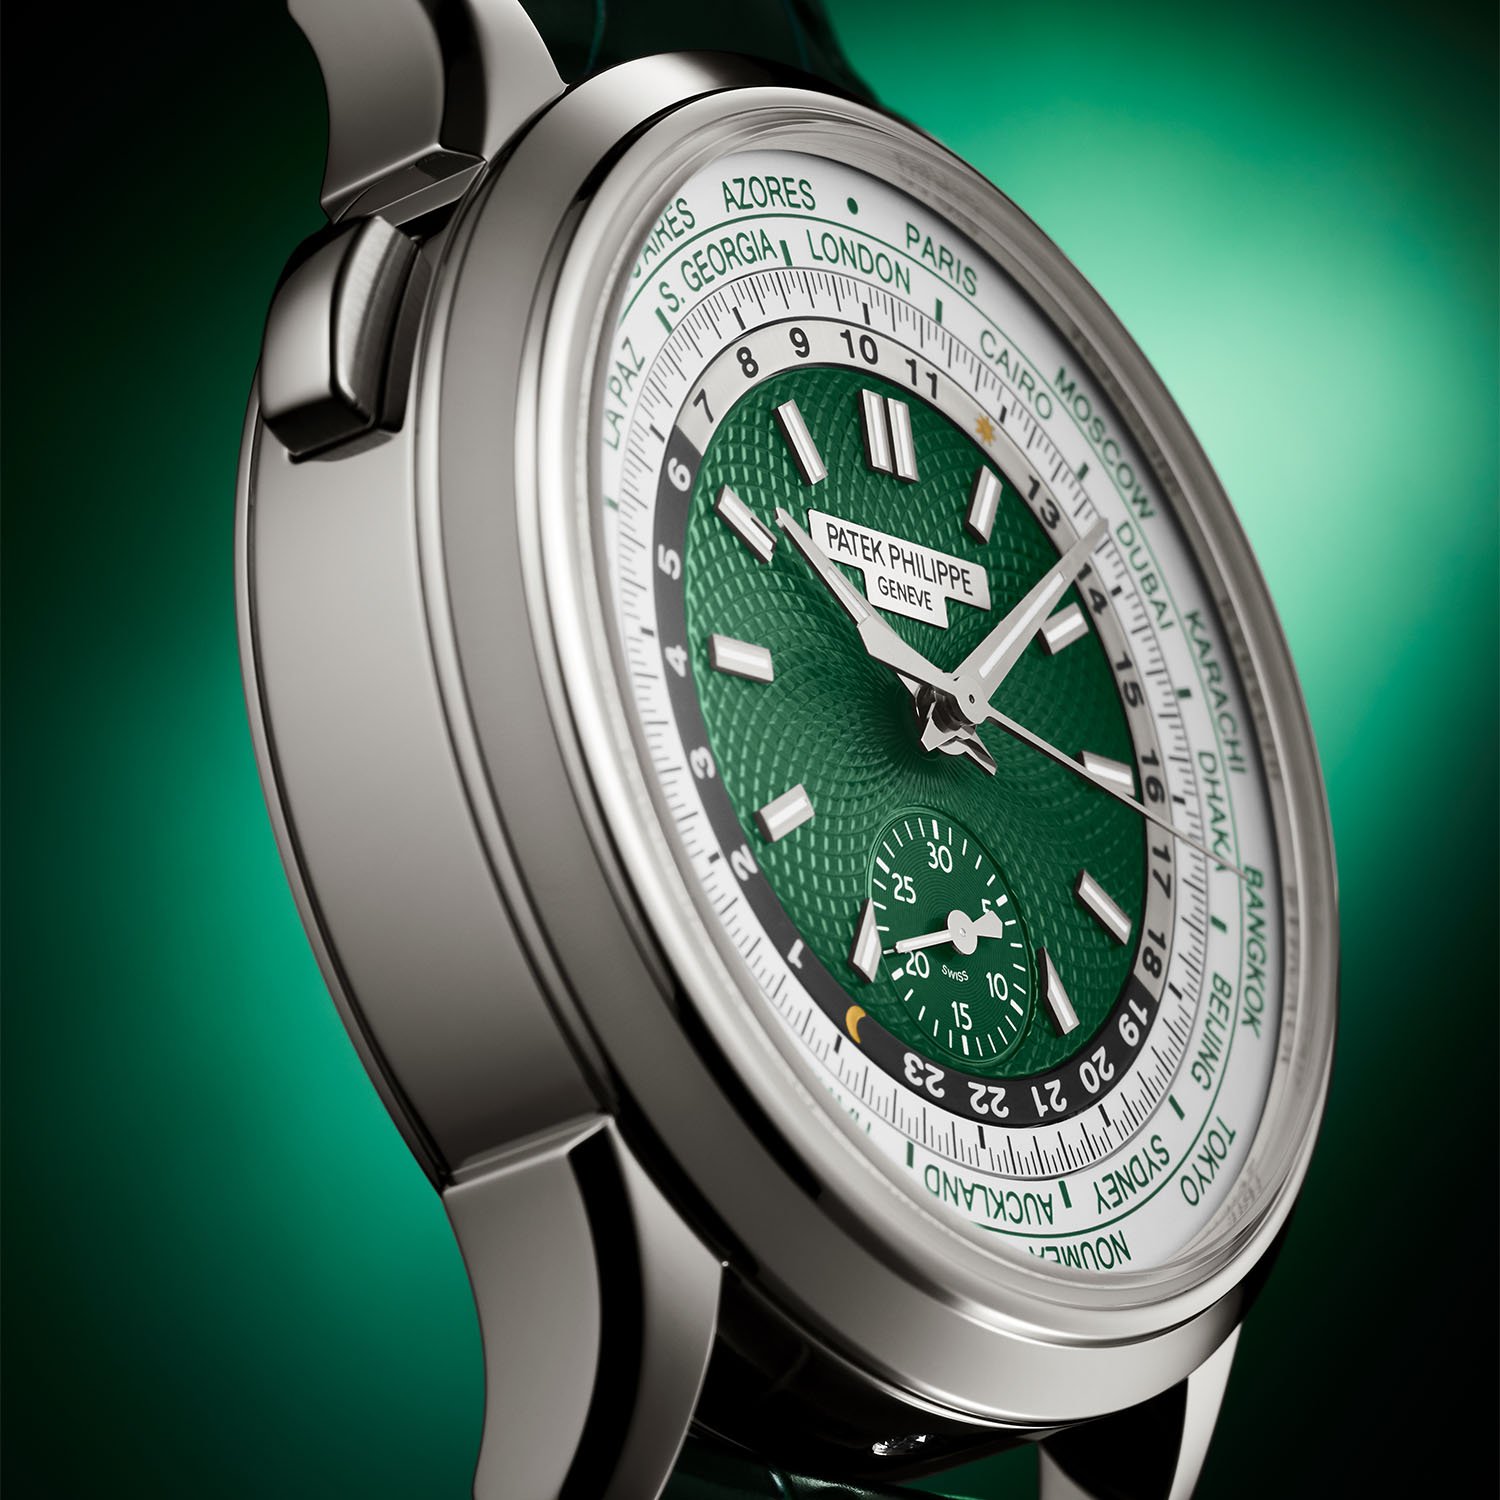 Patek Philippe Self-winding World Time flyback chronograph 5930P-001 platinum green dial